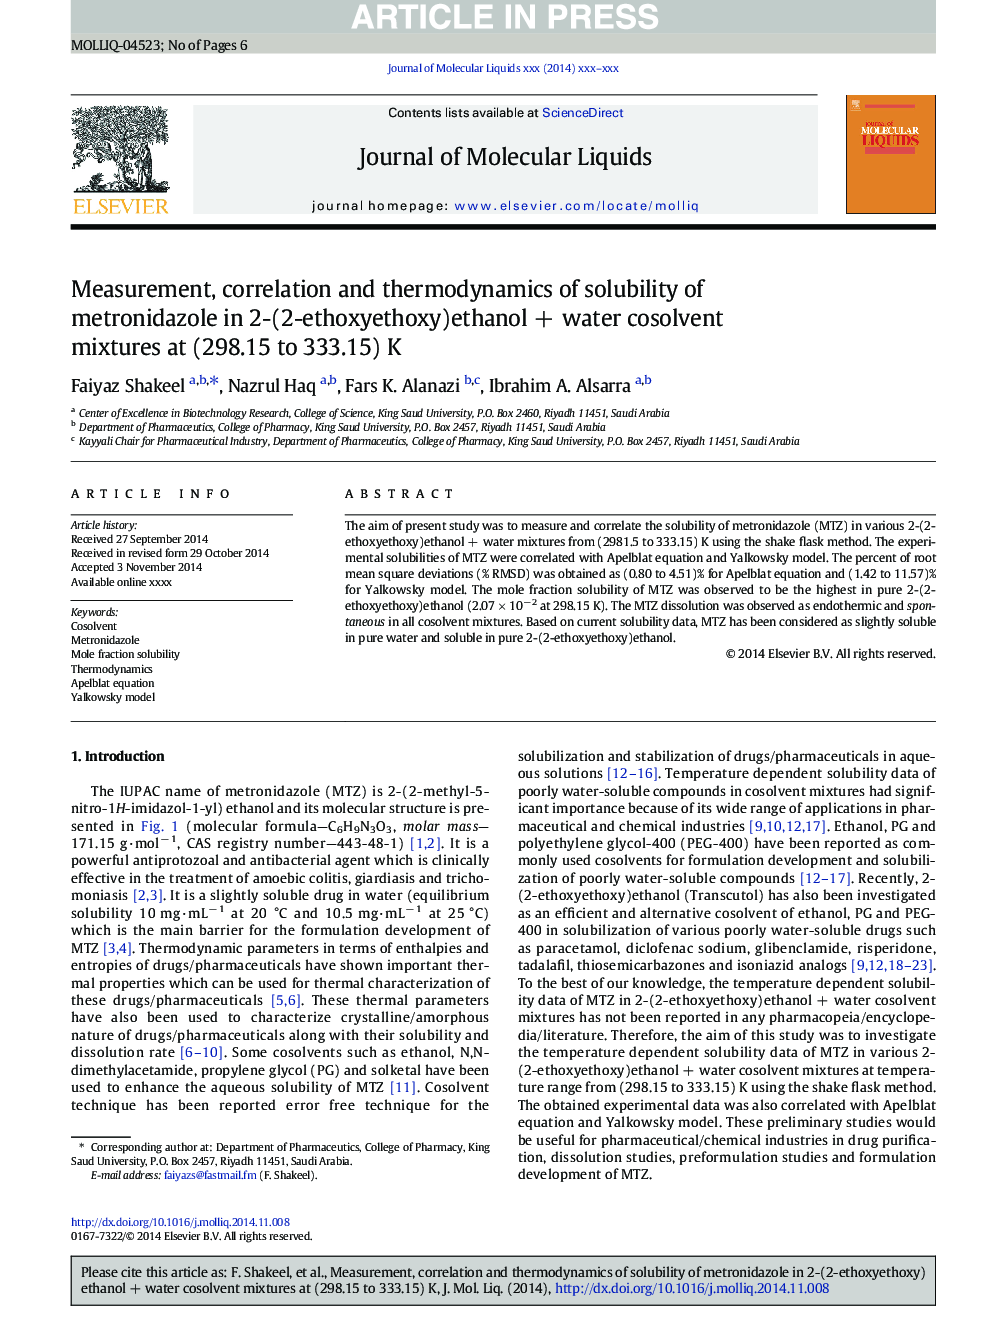 Measurement, correlation and thermodynamics of solubility of metronidazole in 2-(2-ethoxyethoxy)ethanolÂ +Â water cosolvent mixtures at (298.15 to 333.15)Â K